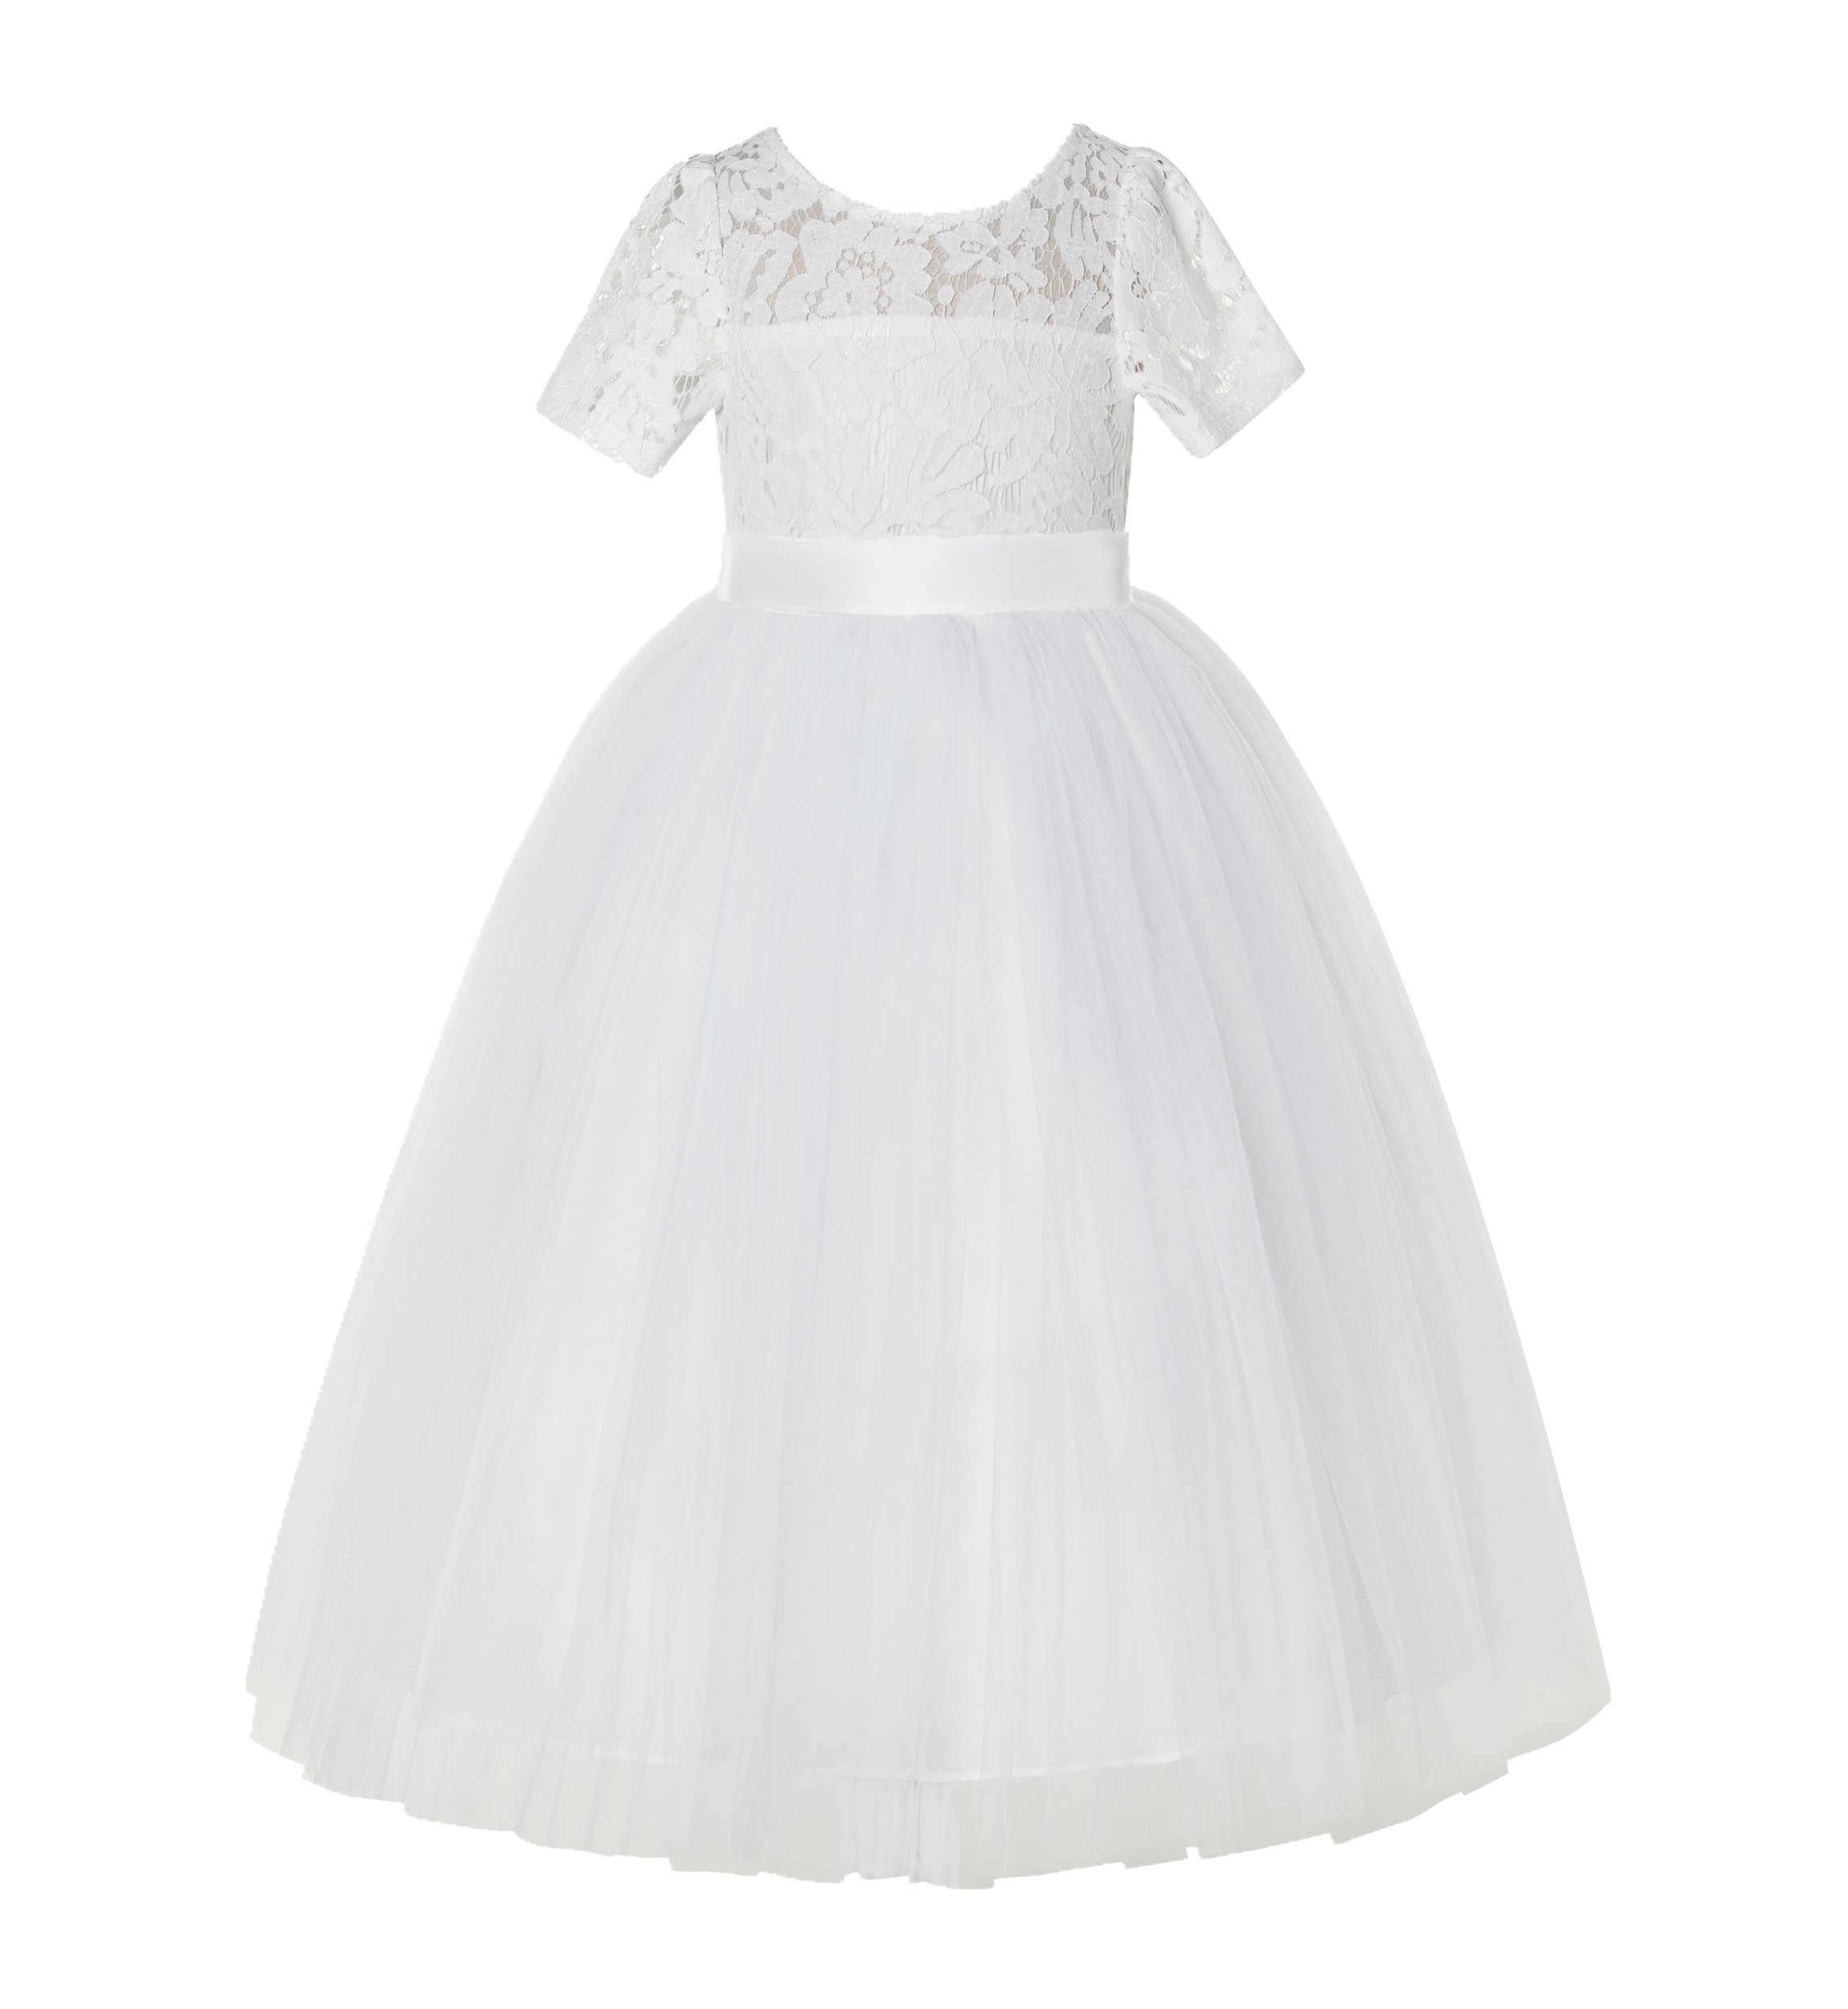 Ivory Floral Lace Flower Girl Dress with Sleeves LG2